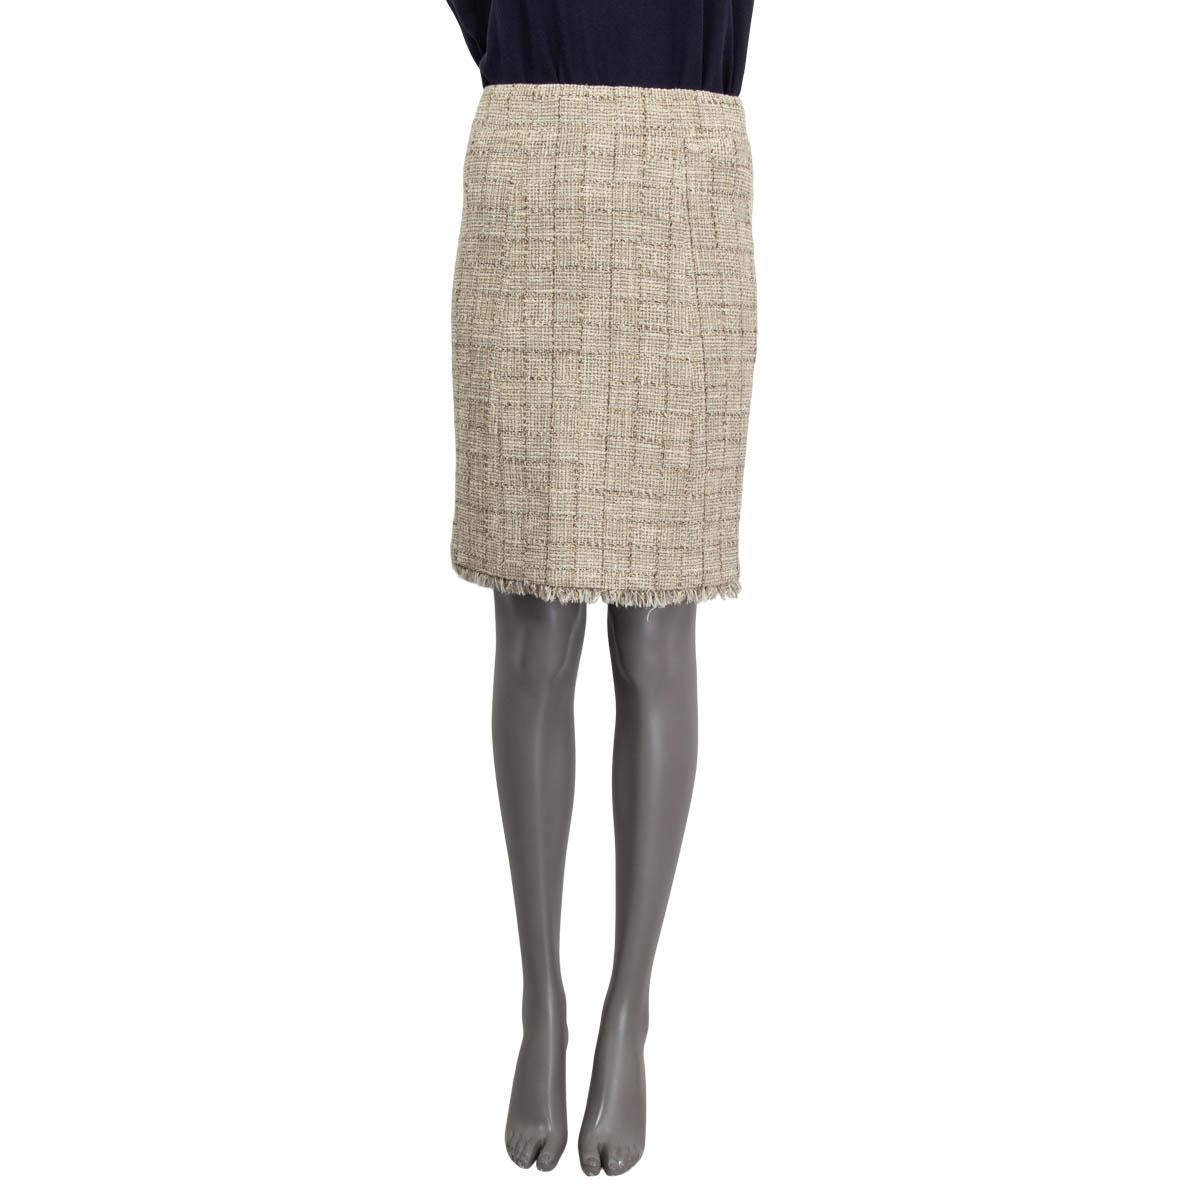 100% authentic Chanel tweed skirt in beige, ecru, white, gold and silver cotton (52%), acrylic (21%), polyester (13%), rayon (6%), nylon (4%) and wool (4%). Embellished with small fringes around the hemline. Opens with a concealed zipper and a three